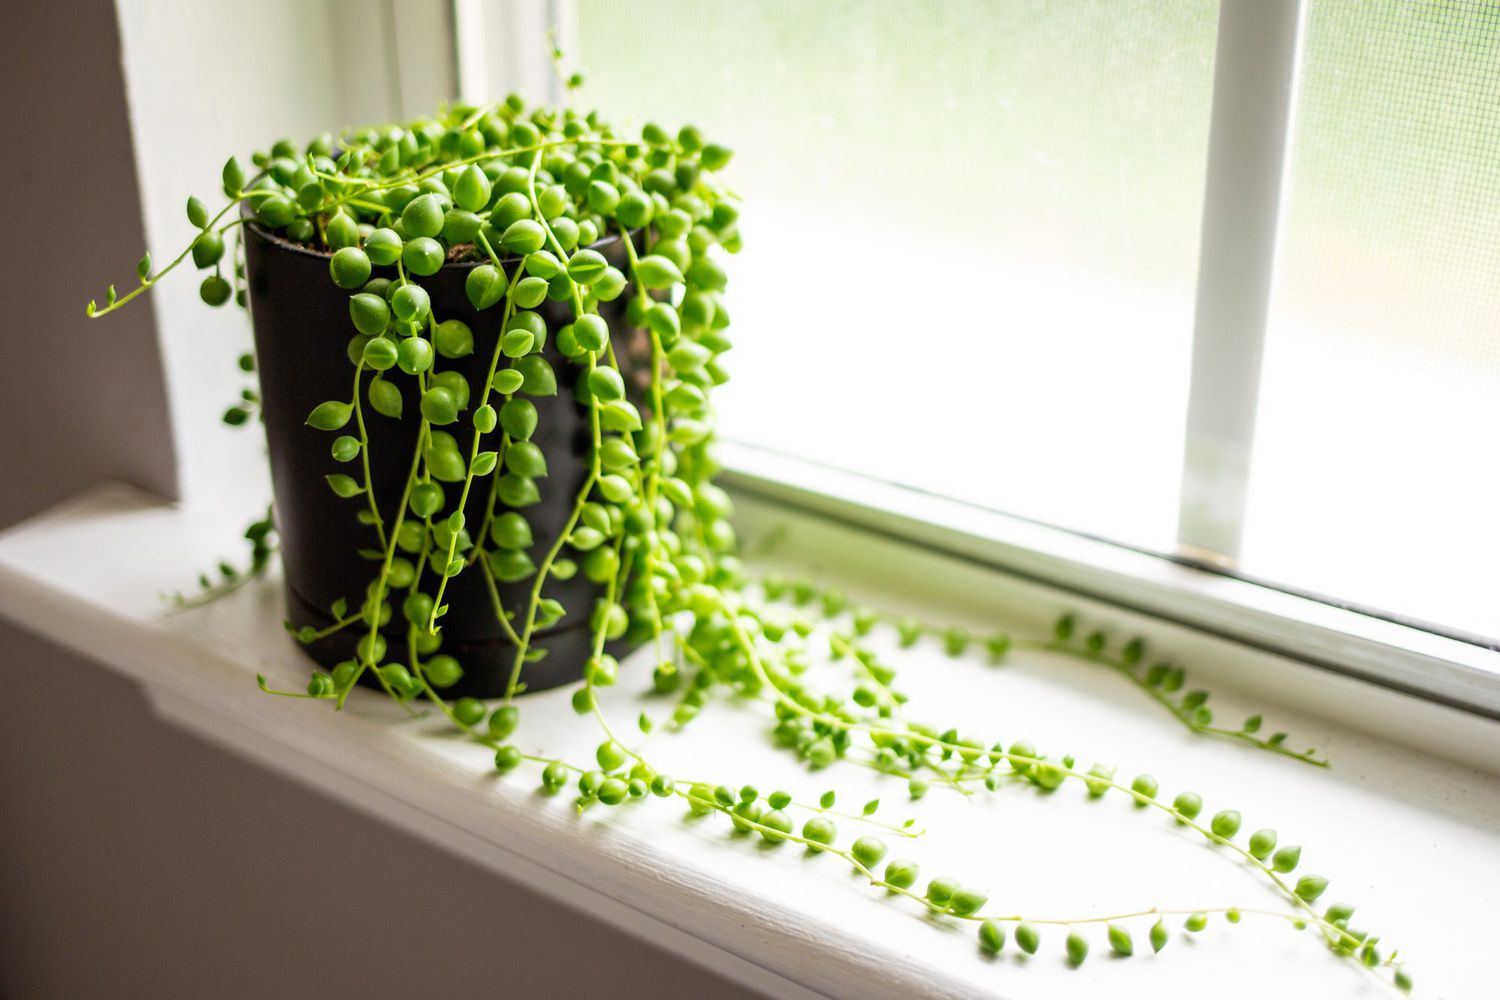 How to care for a string of pearls plant